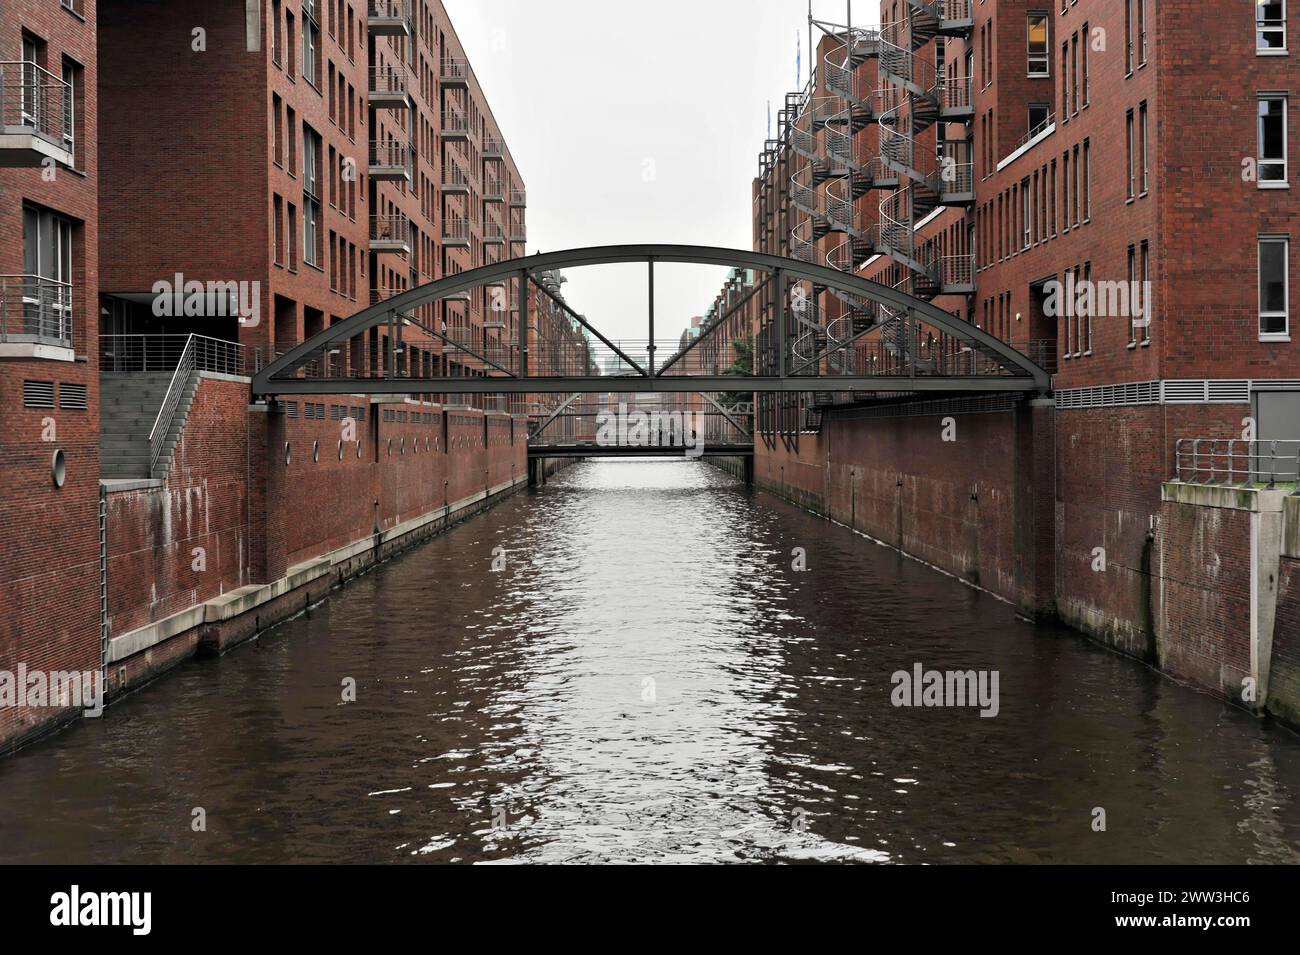 A pedestrian bridge over a water channel with brick buildings on the sides, Hamburg, Hanseatic City of Hamburg, Germany Stock Photo